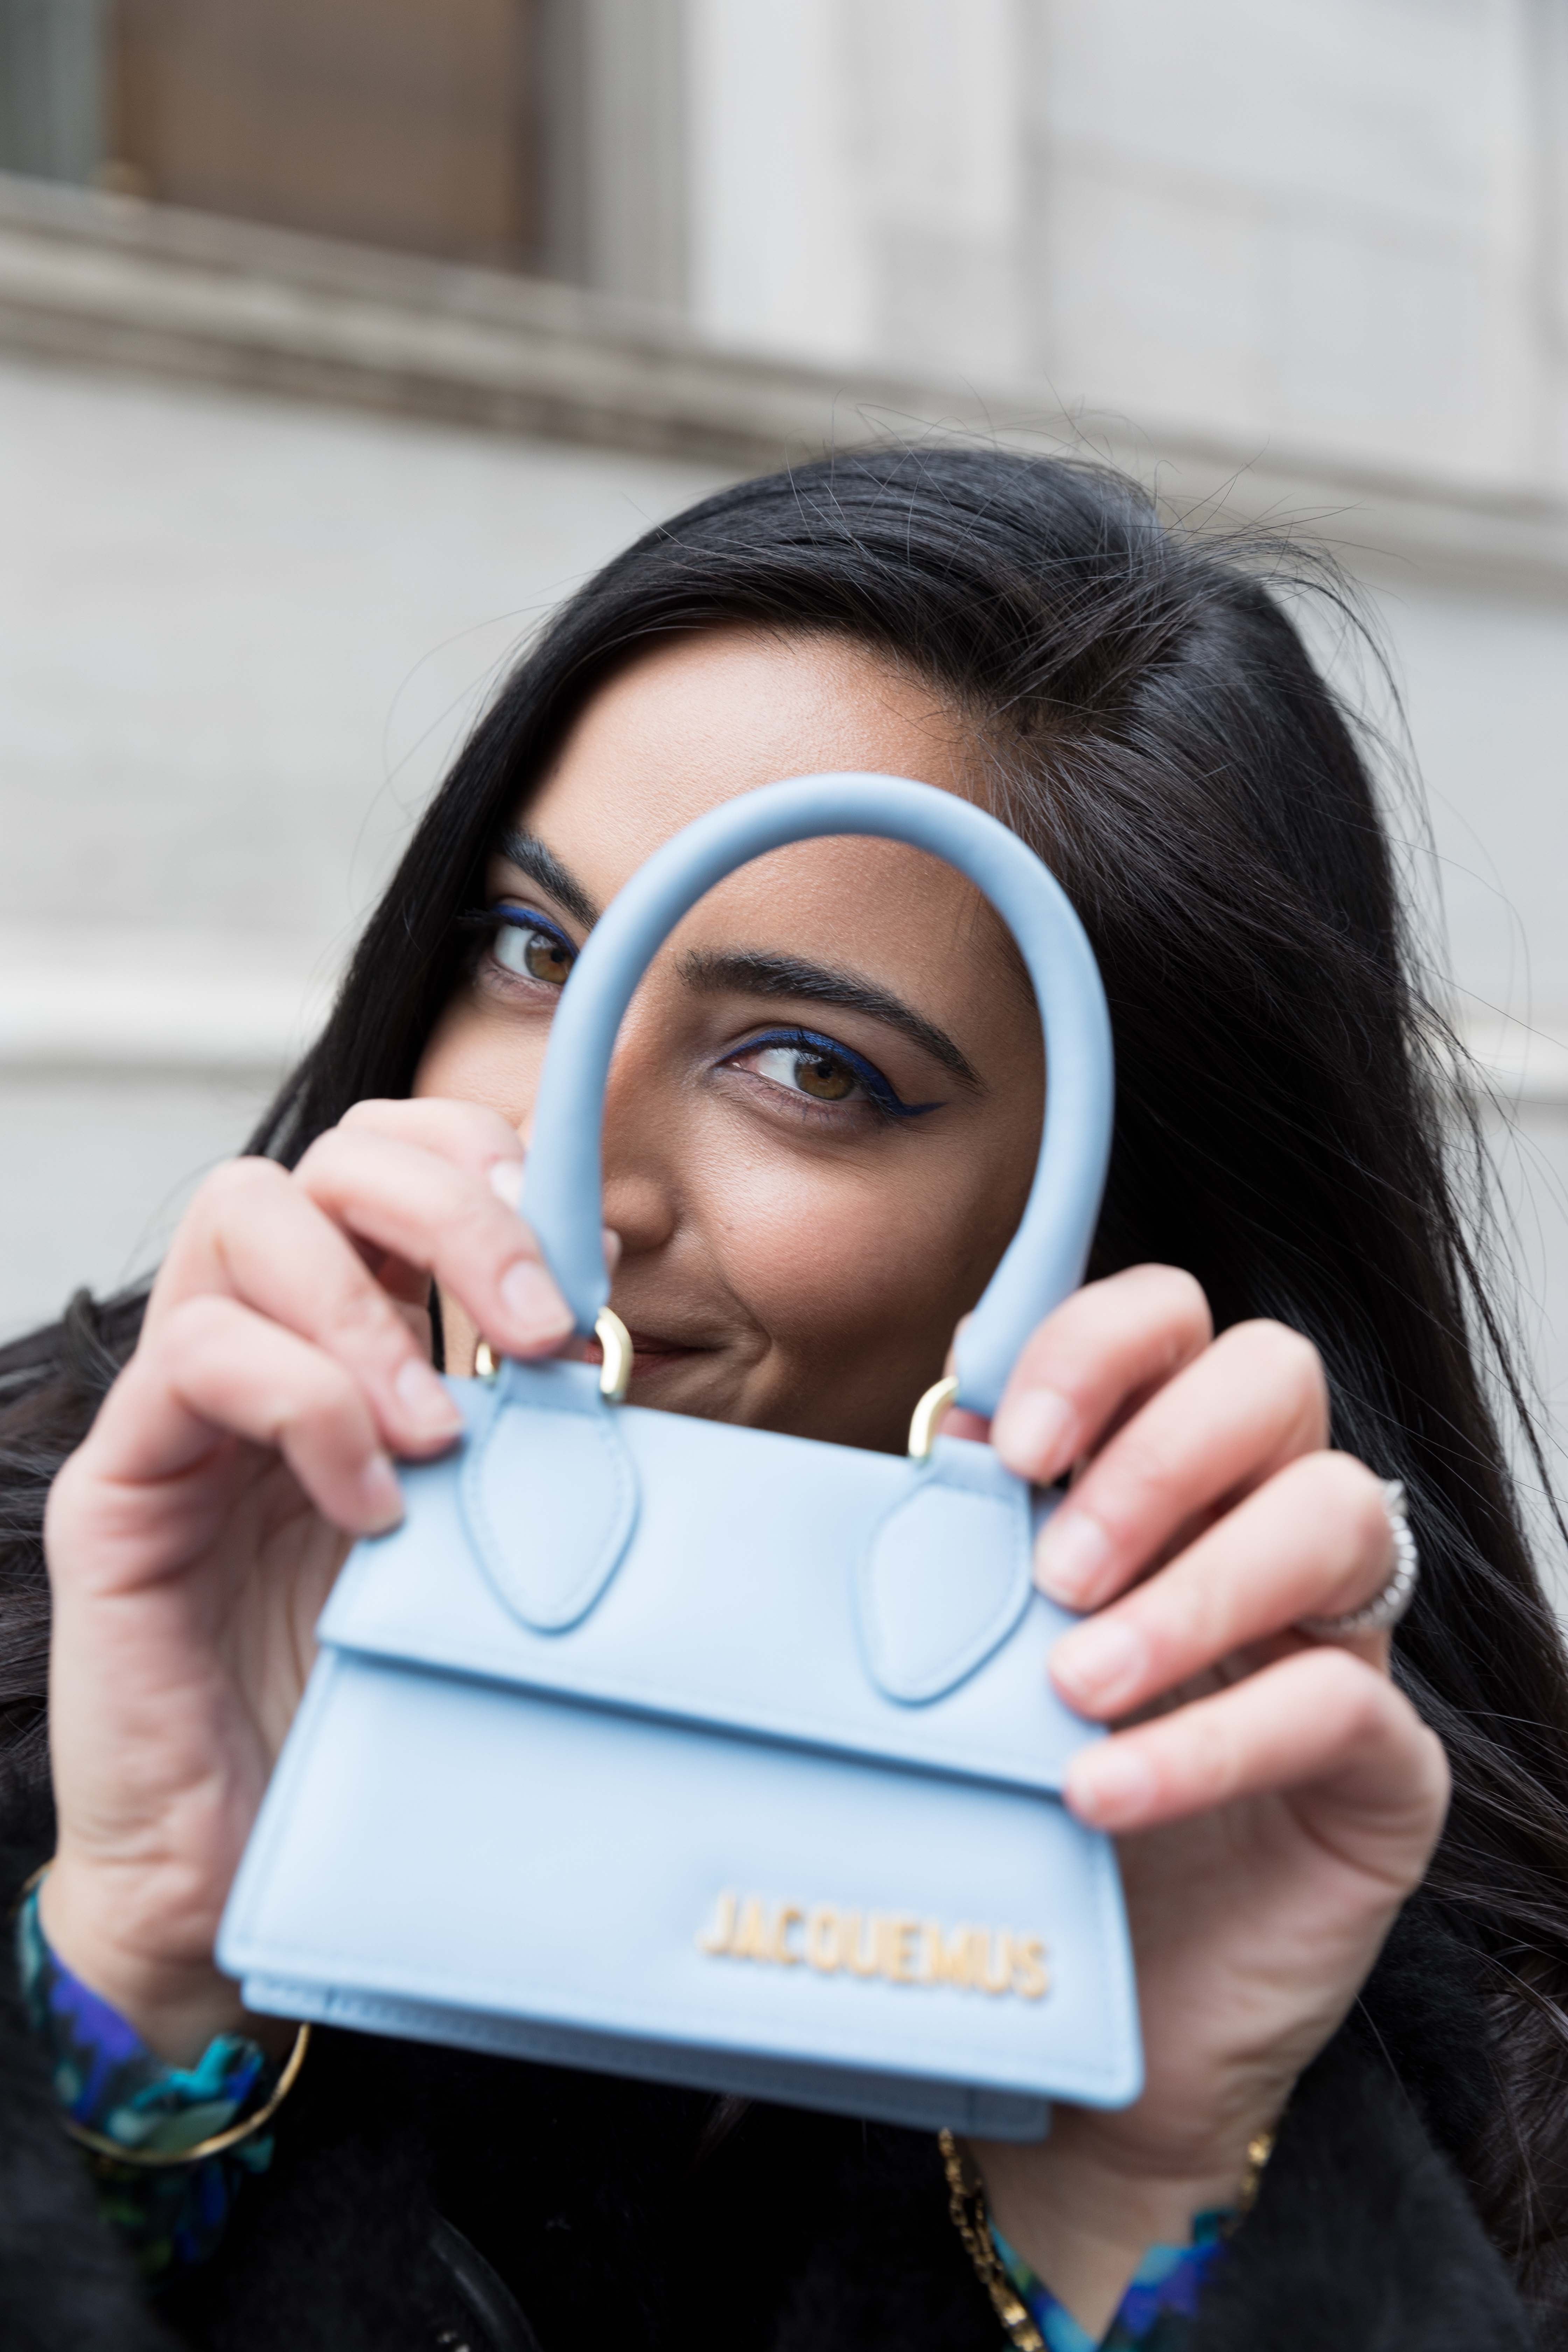 This Cute Mini Bag is Going to Add Spark in Your Look